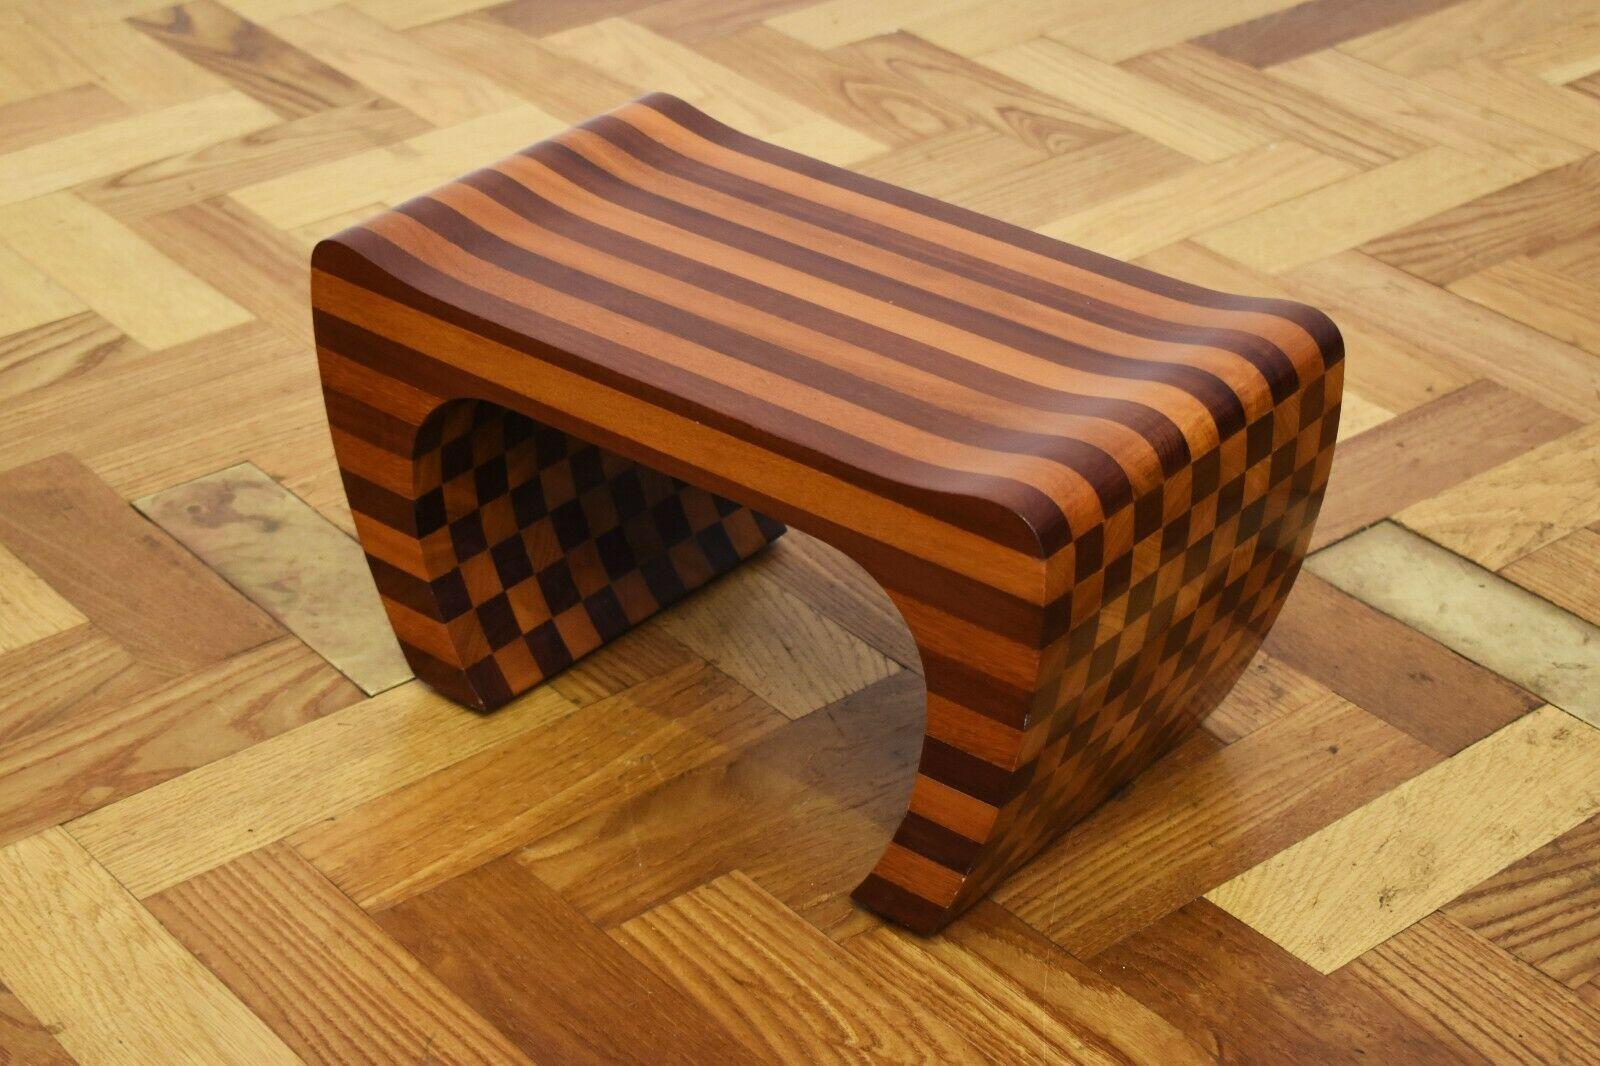 This rare and unique stool/small bench was designed in Manauas-AM, the capital of the Brazilian state of Amazonas, by Luiz Galvao.